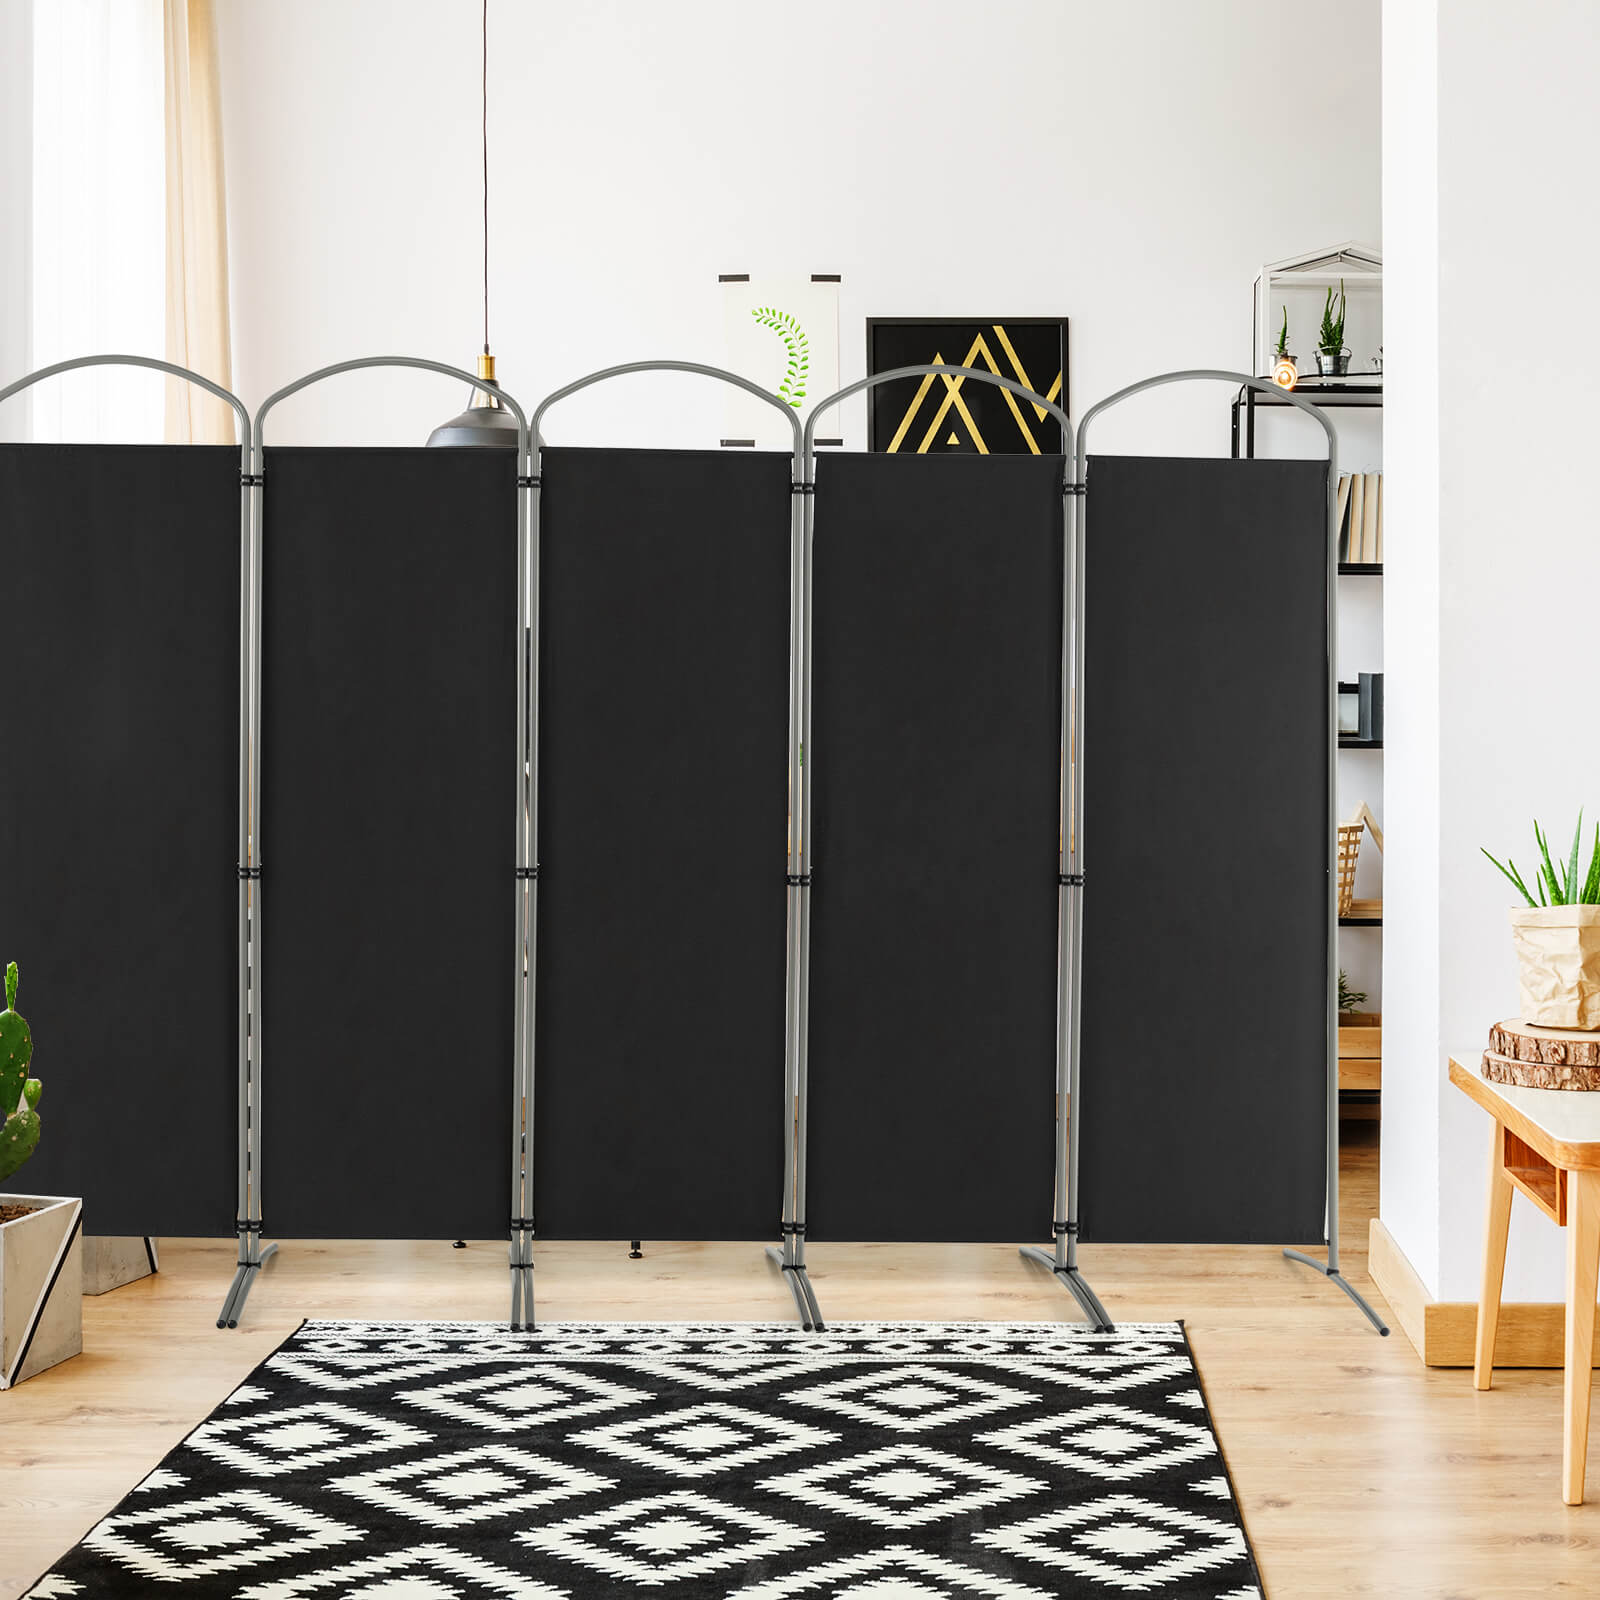 6 Panel Freestanding Fabric Room Divider for Home and Office-Black